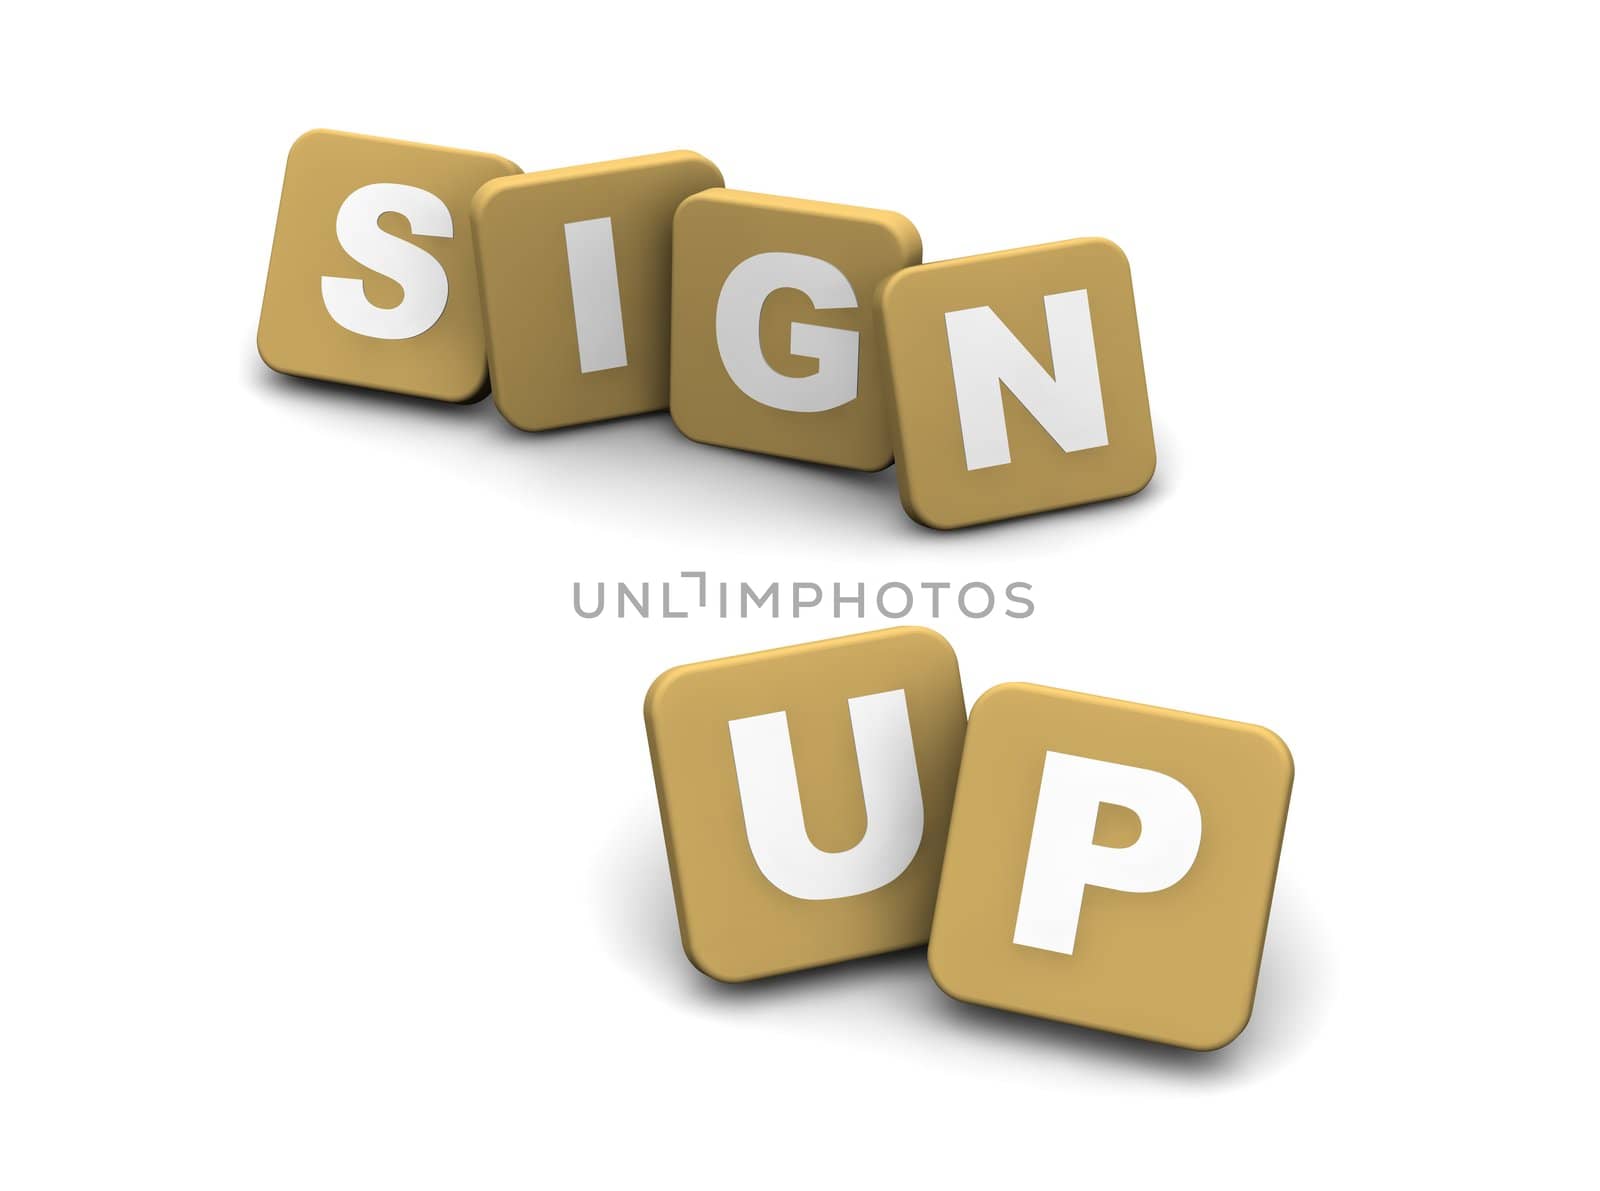 Sign up text. 3d rendered illustration isolated on white.